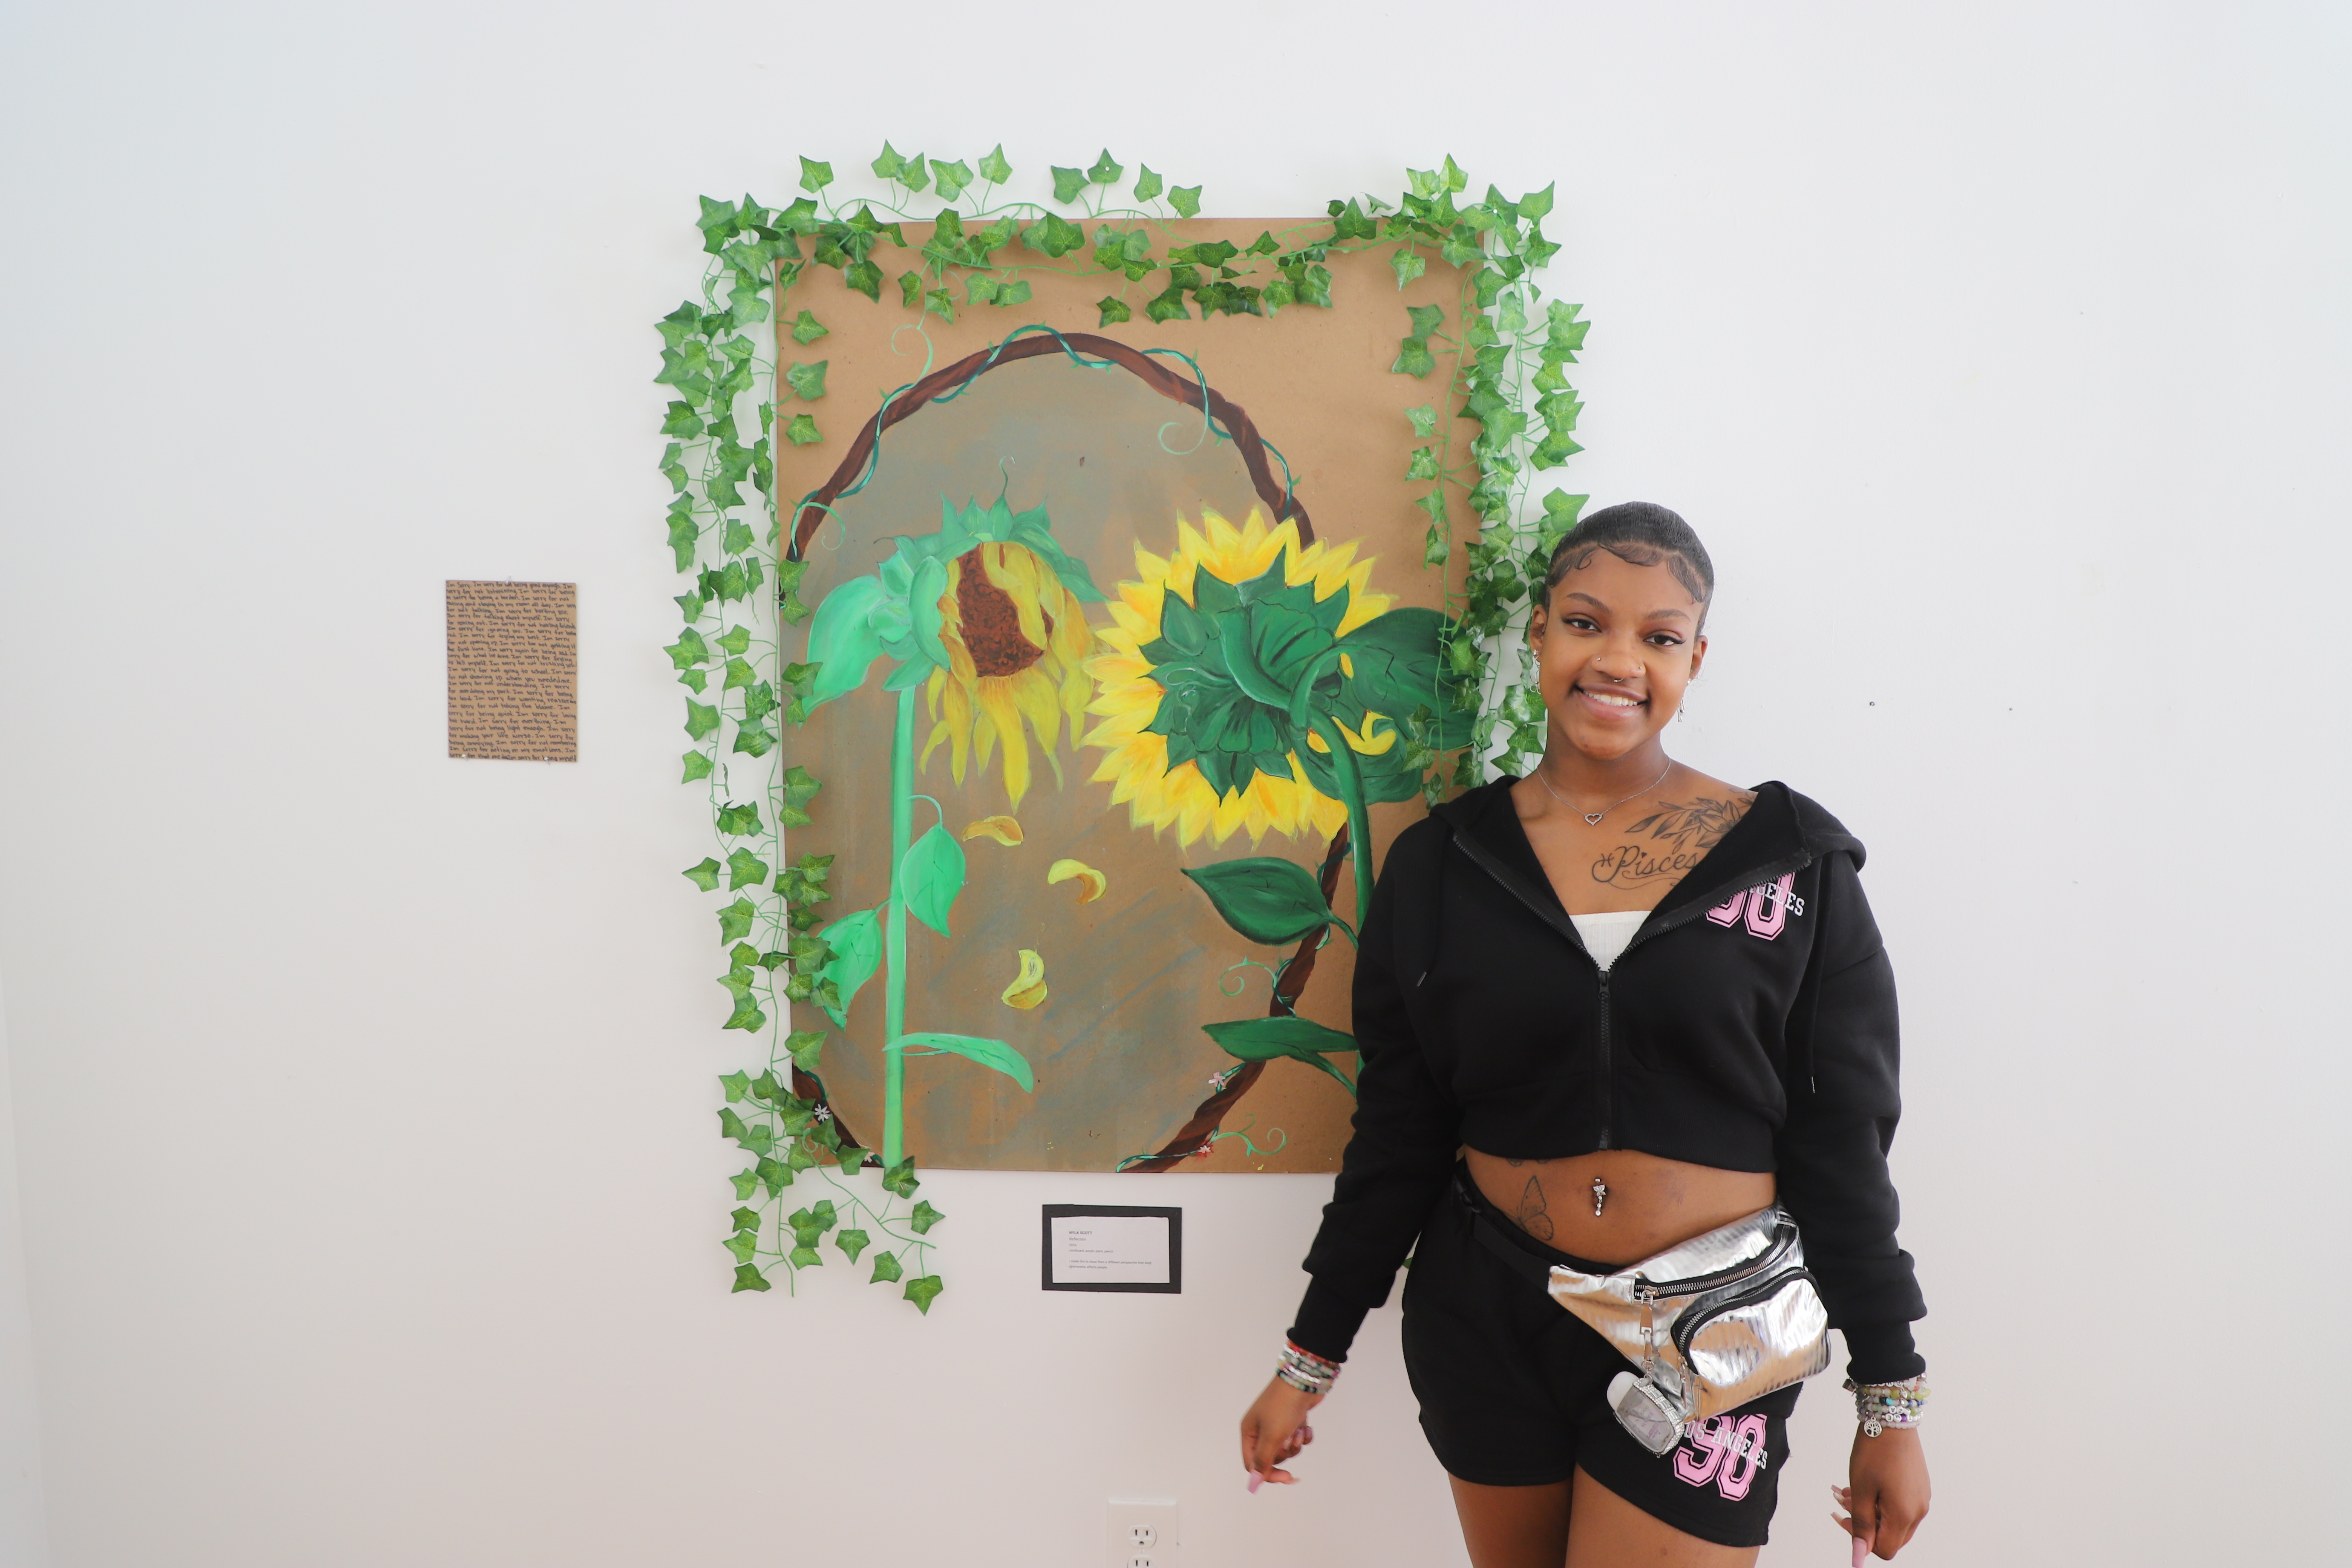 LEAP student, Nyla, standing in front of a large painted she created.